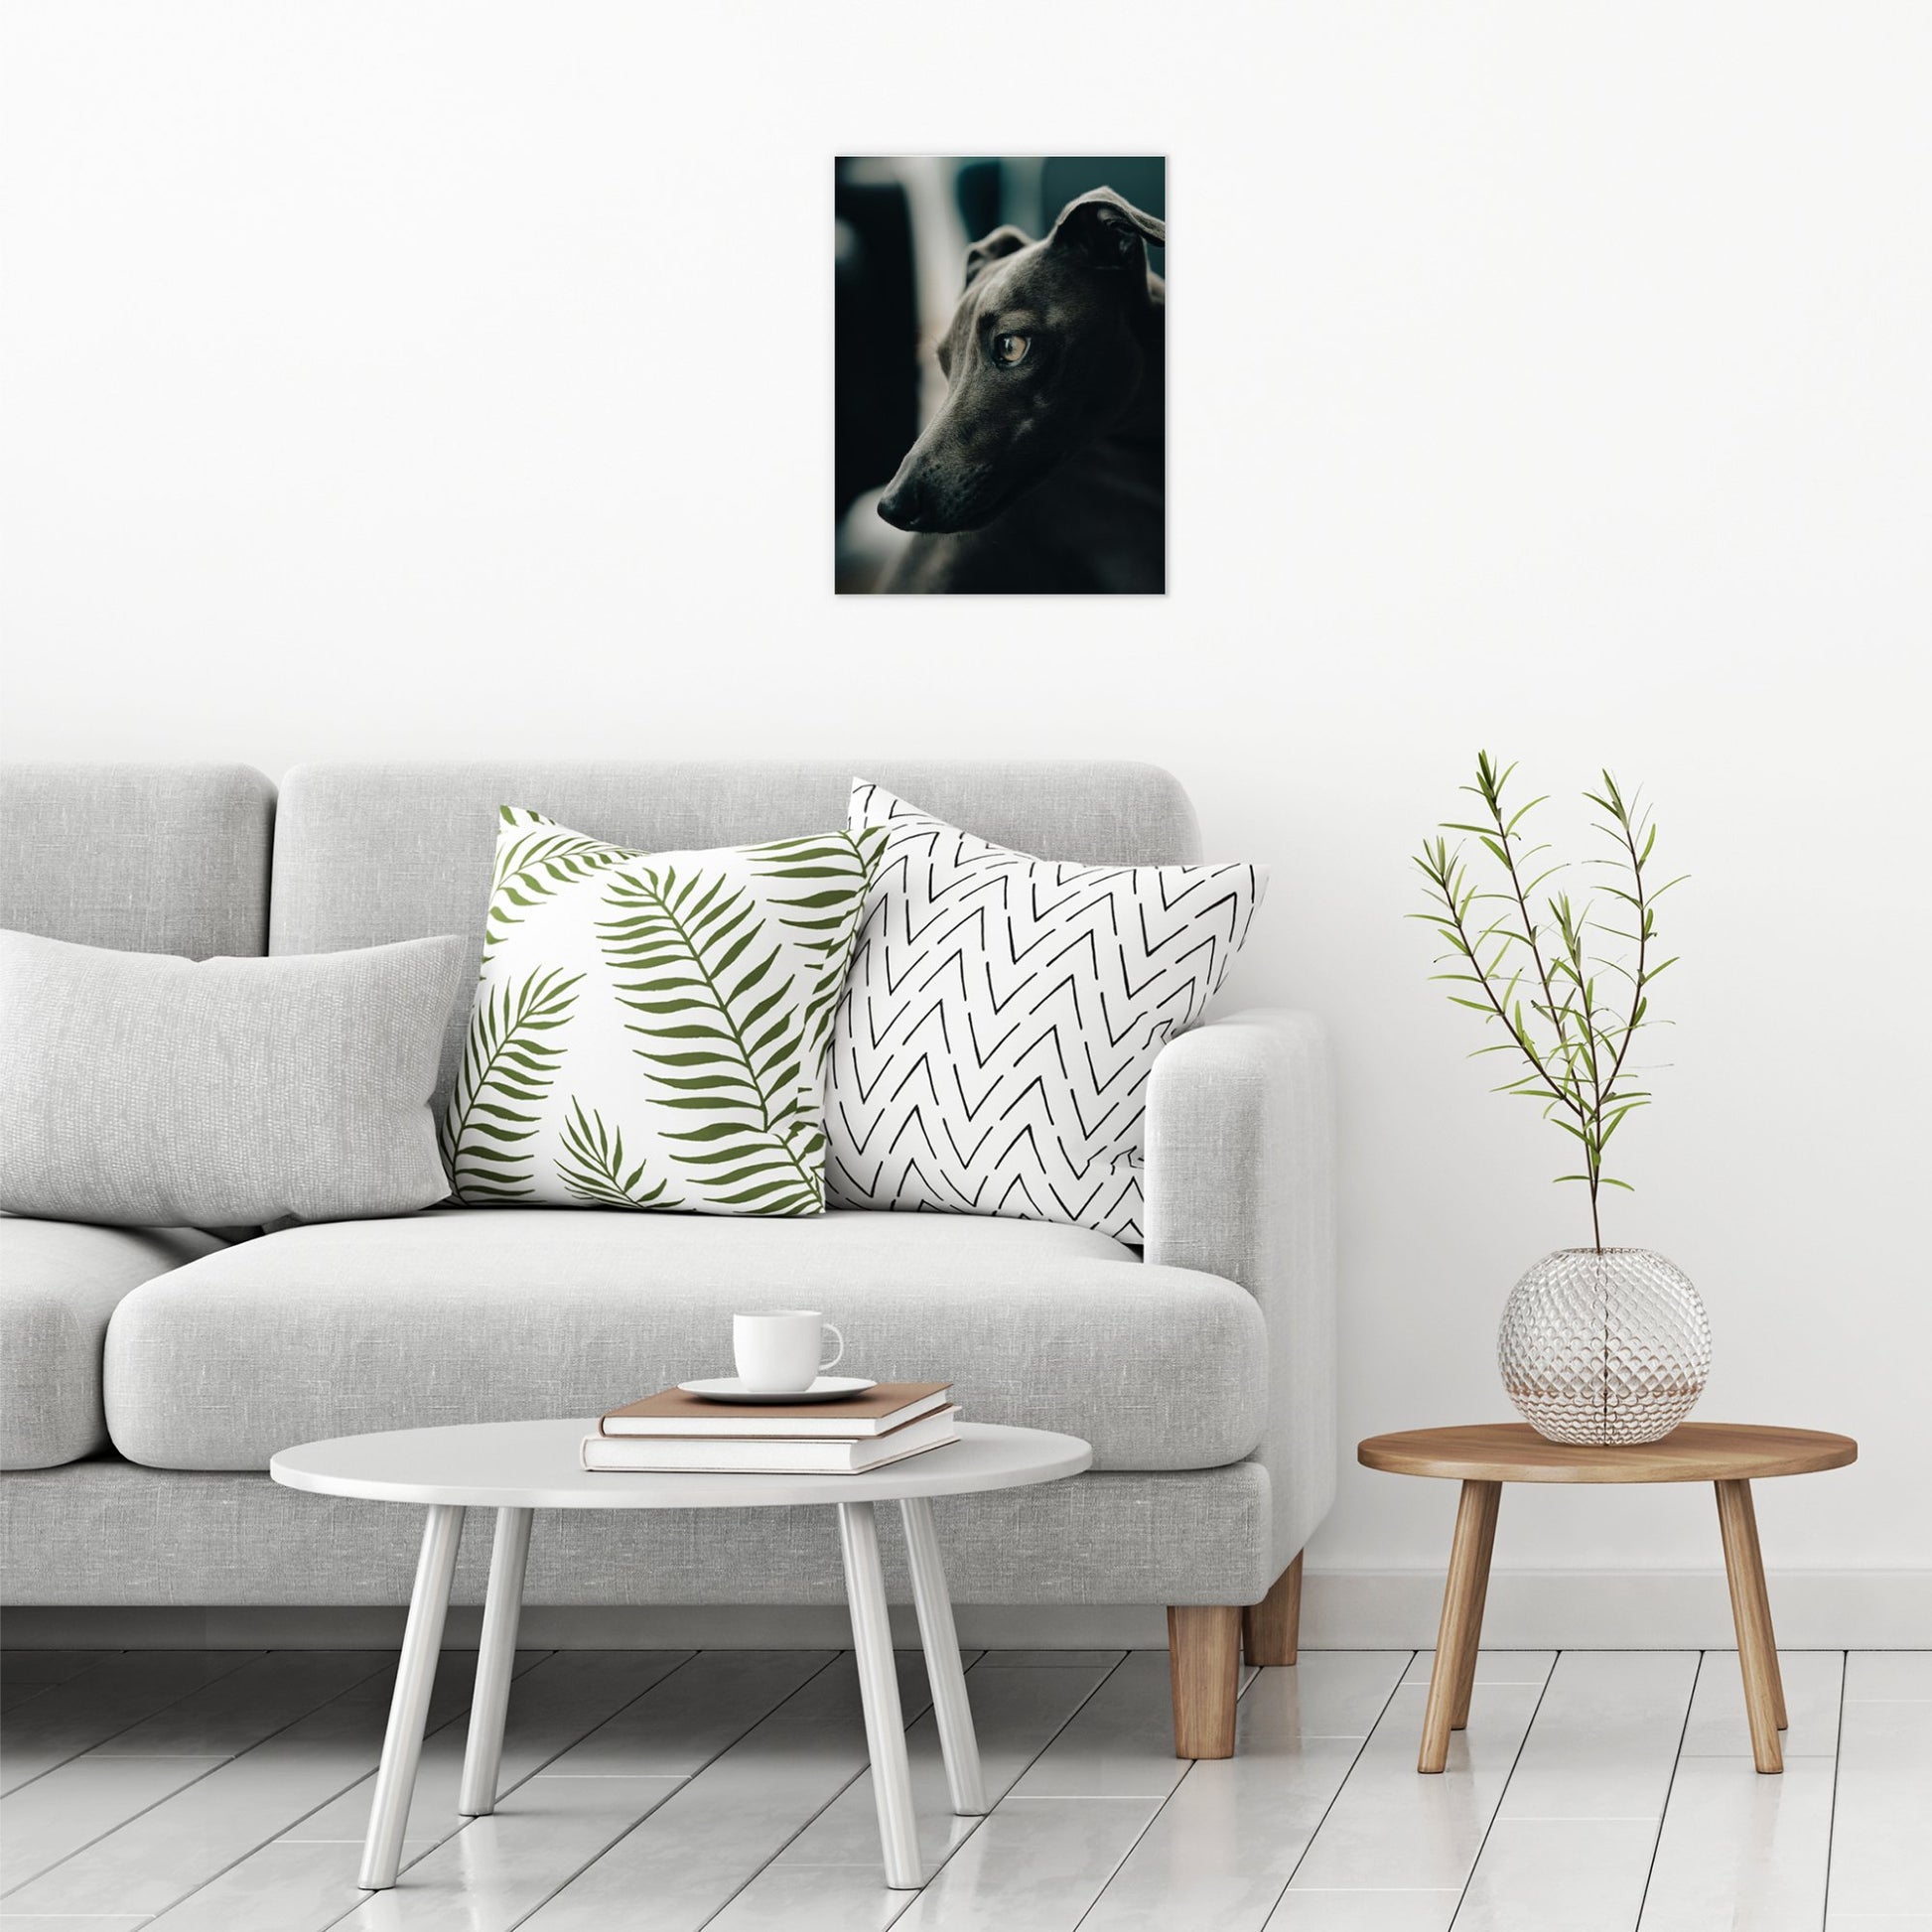 A contemporary modern room view showing a medium size metal art poster display plate with printed design of a Black Whippet